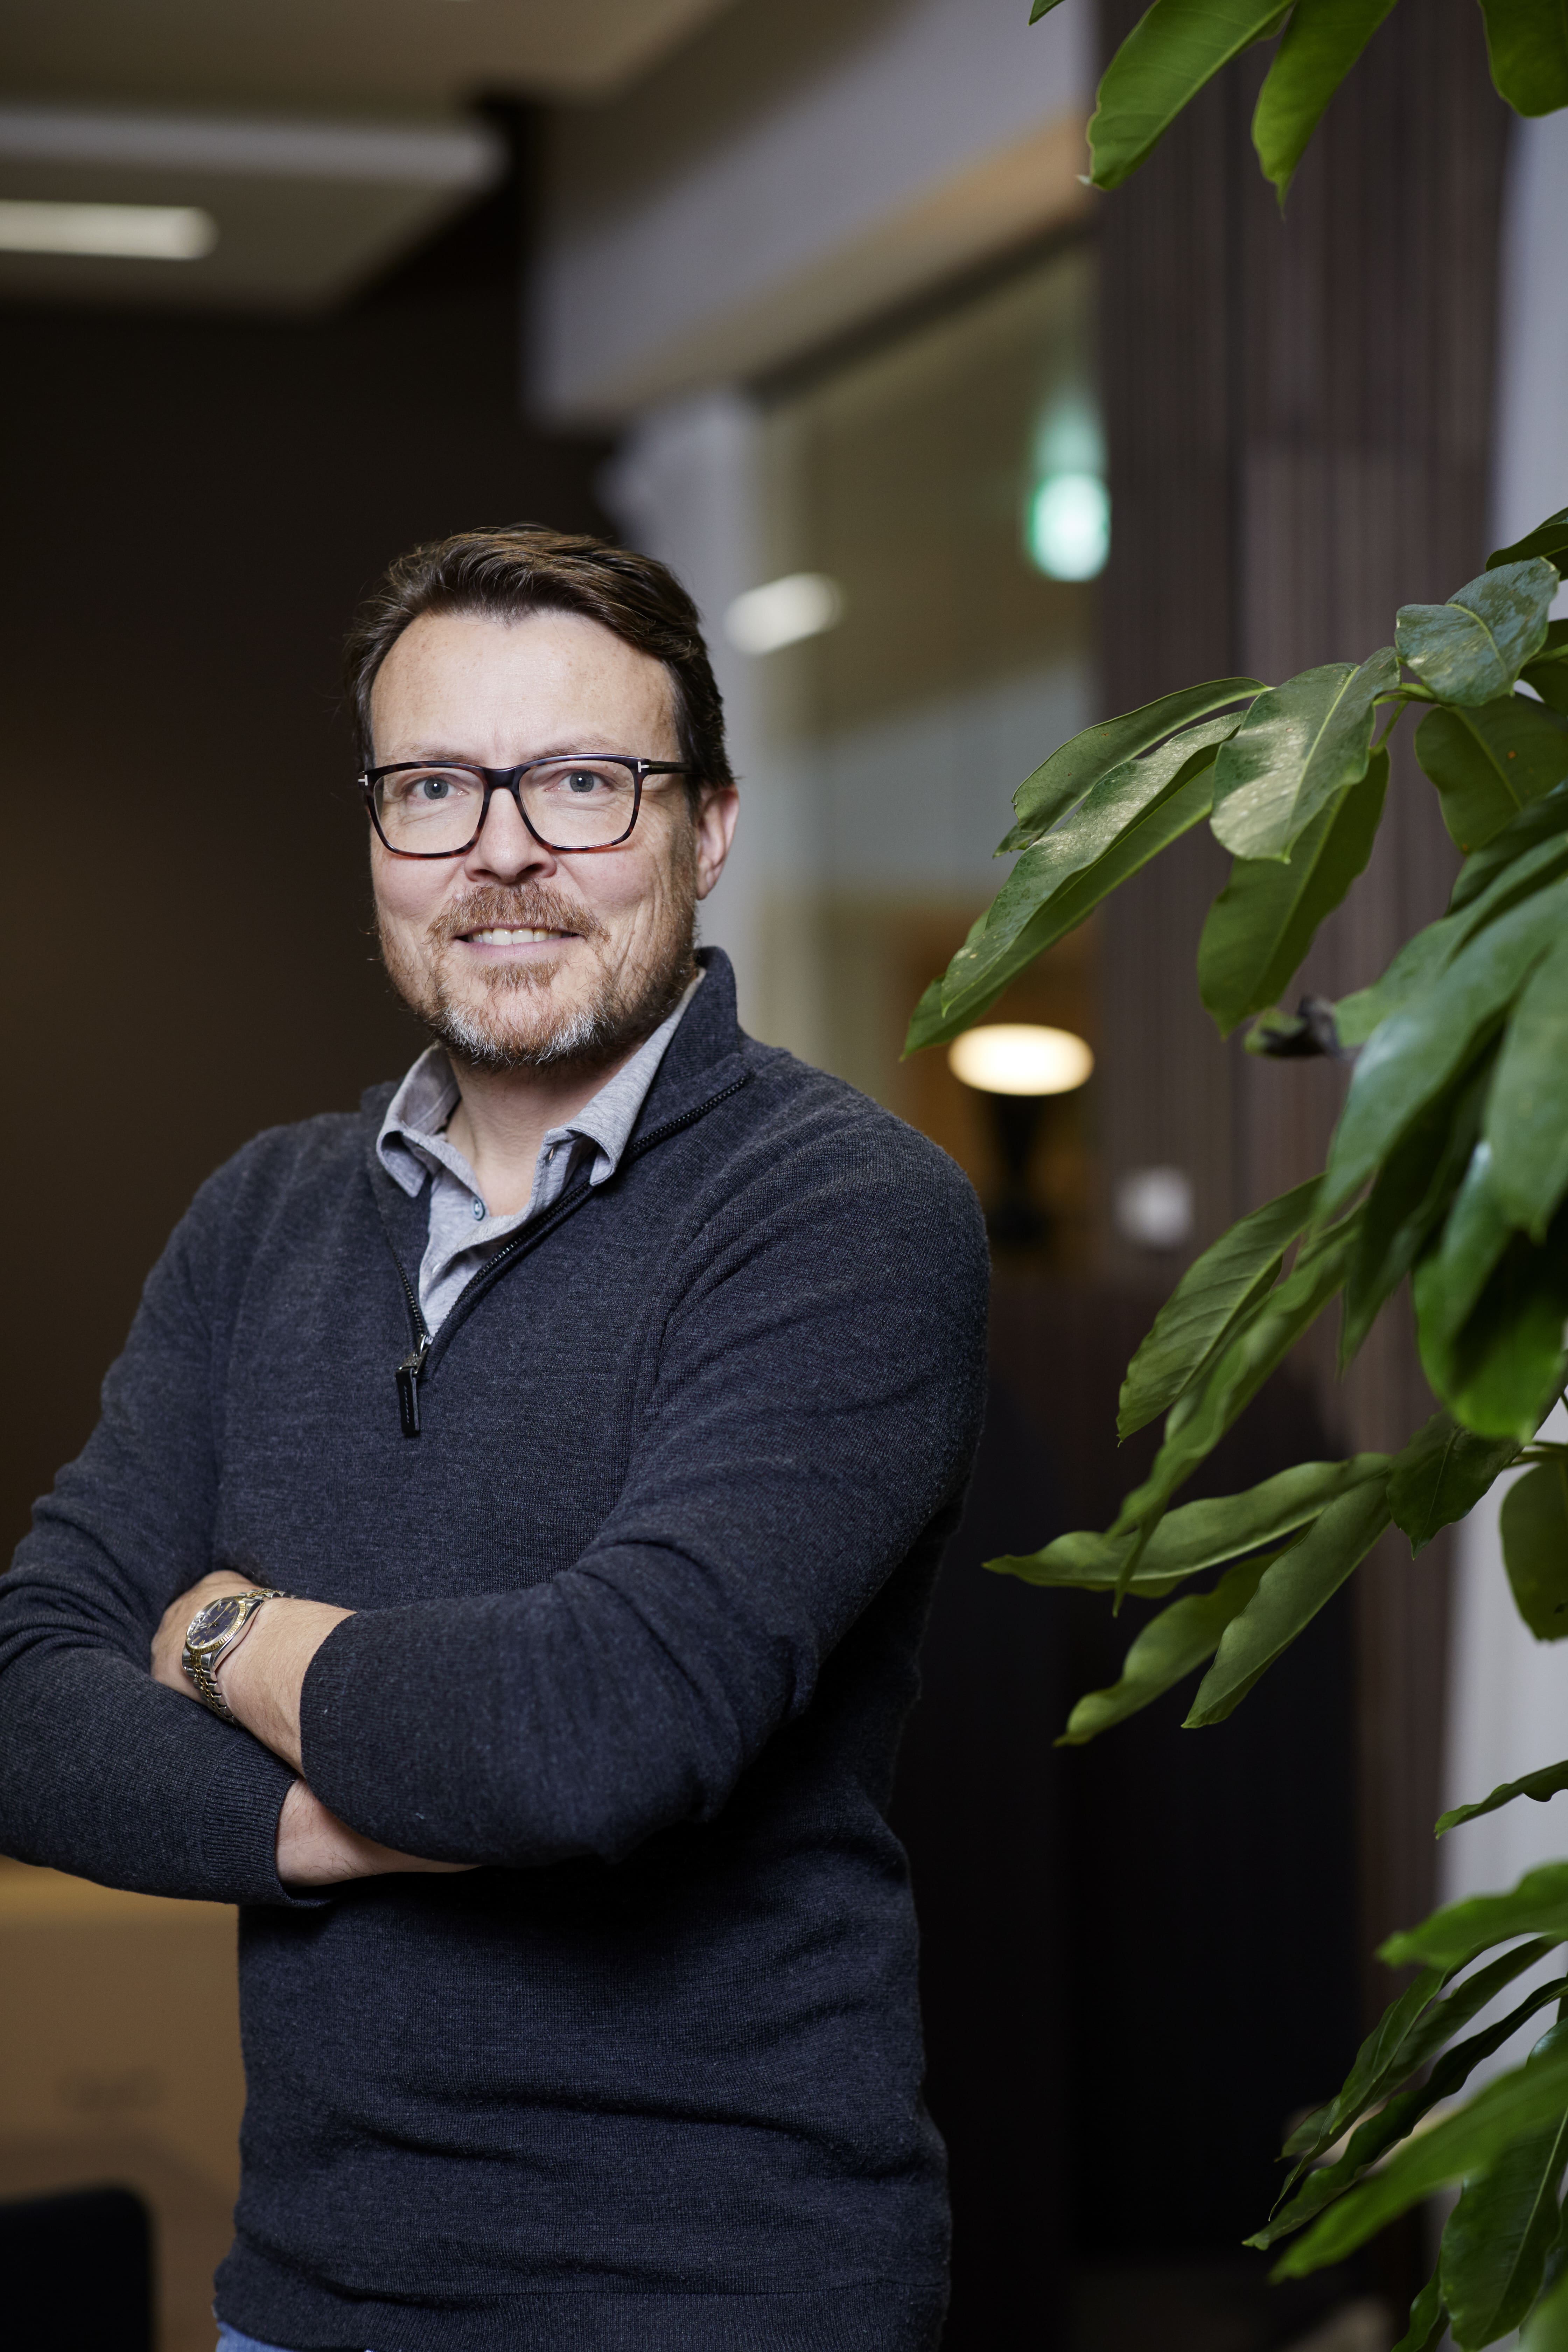 HRH, Prince Constantijn van Oranje, Special Envoy to Techleap.nl and the Netherlands